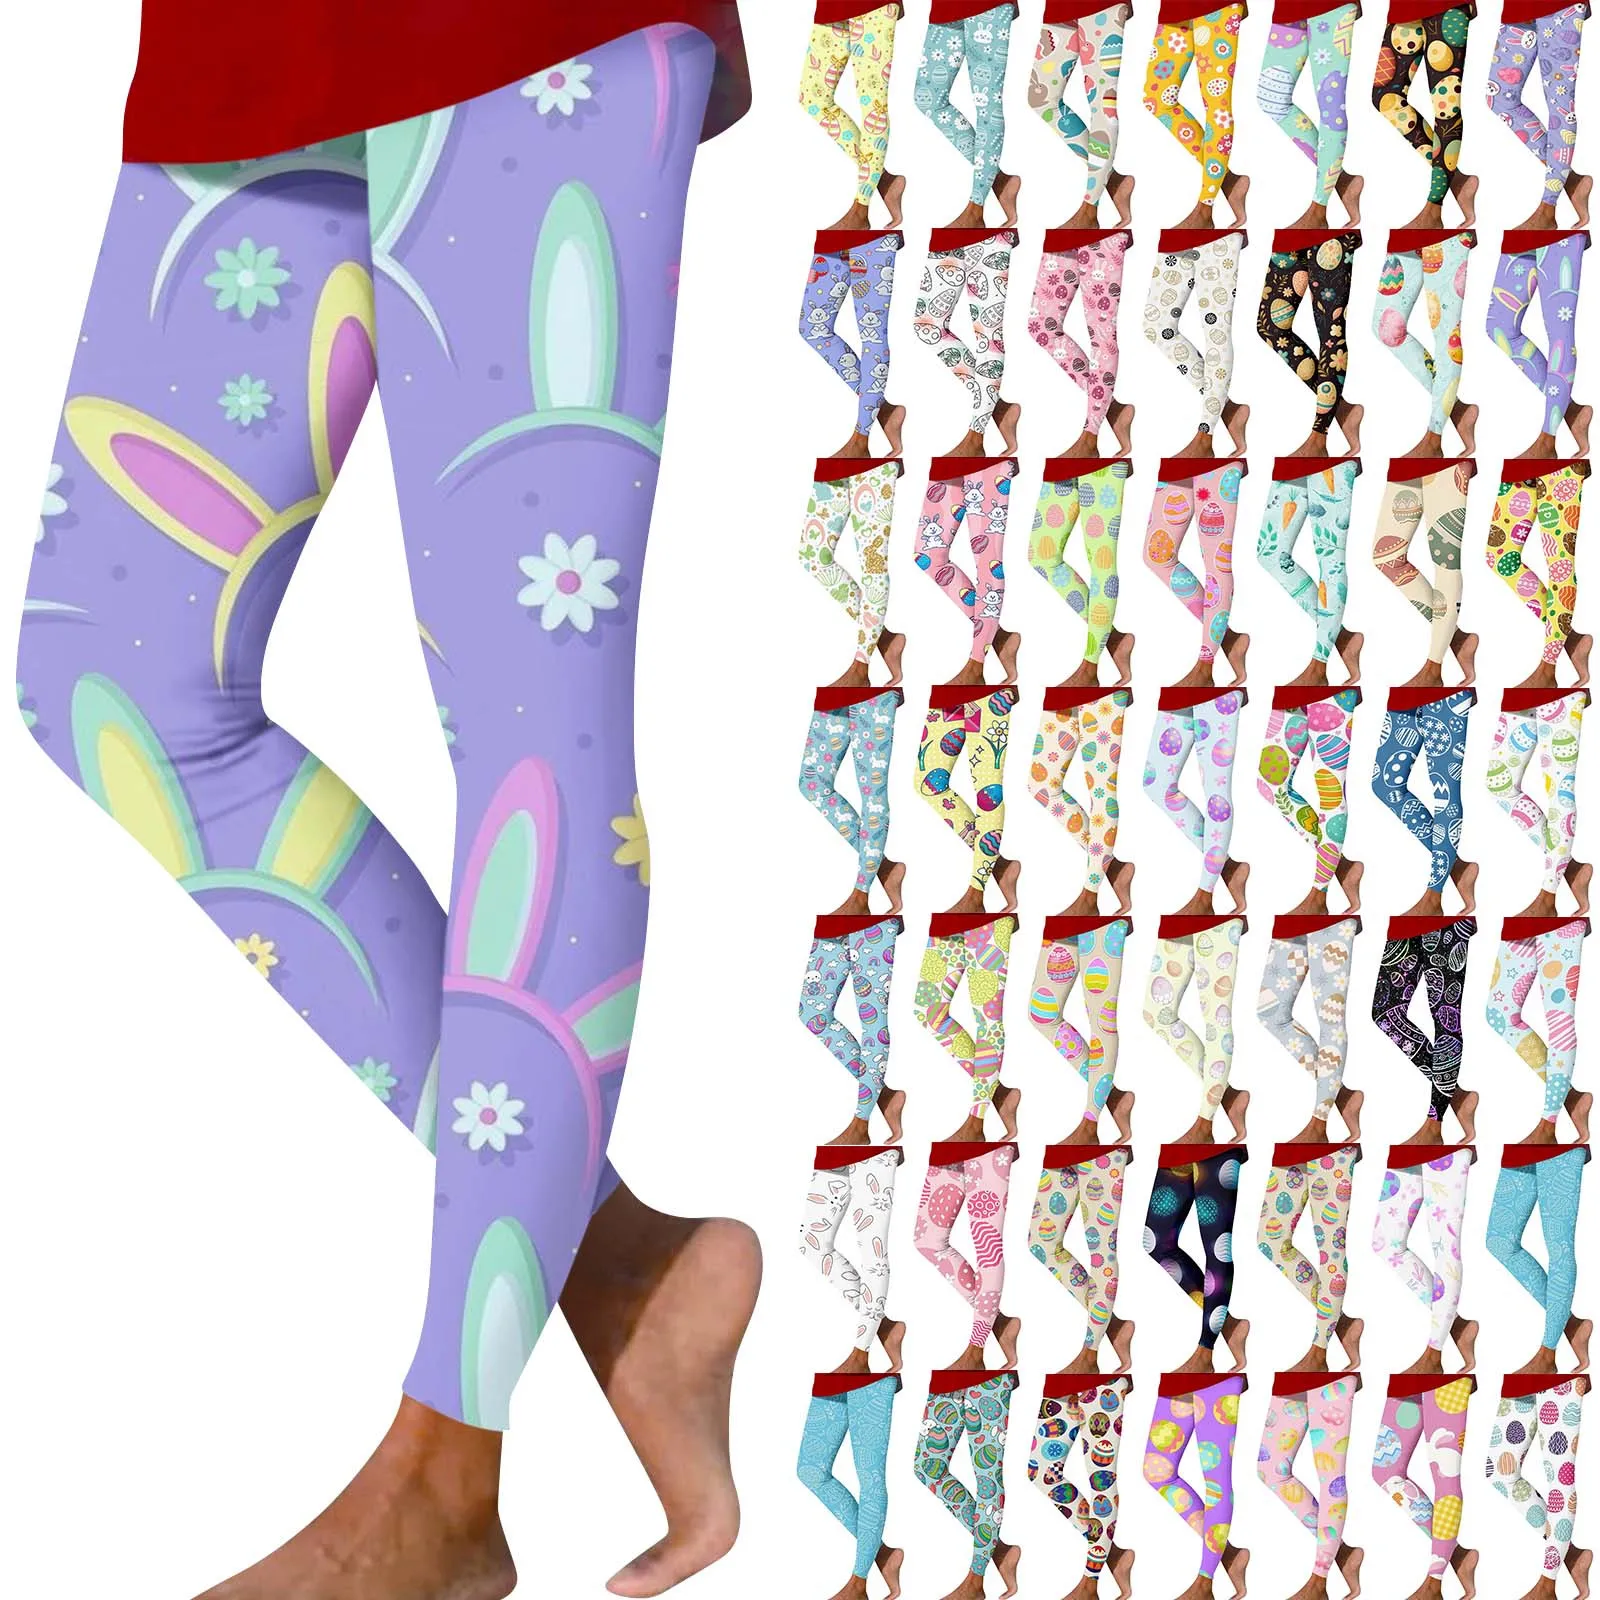 

High Waisted Yoga Pants For Women Girls Colorful Funny Easter Day Printed Stretchy Workout Leggings Tights calça feminina